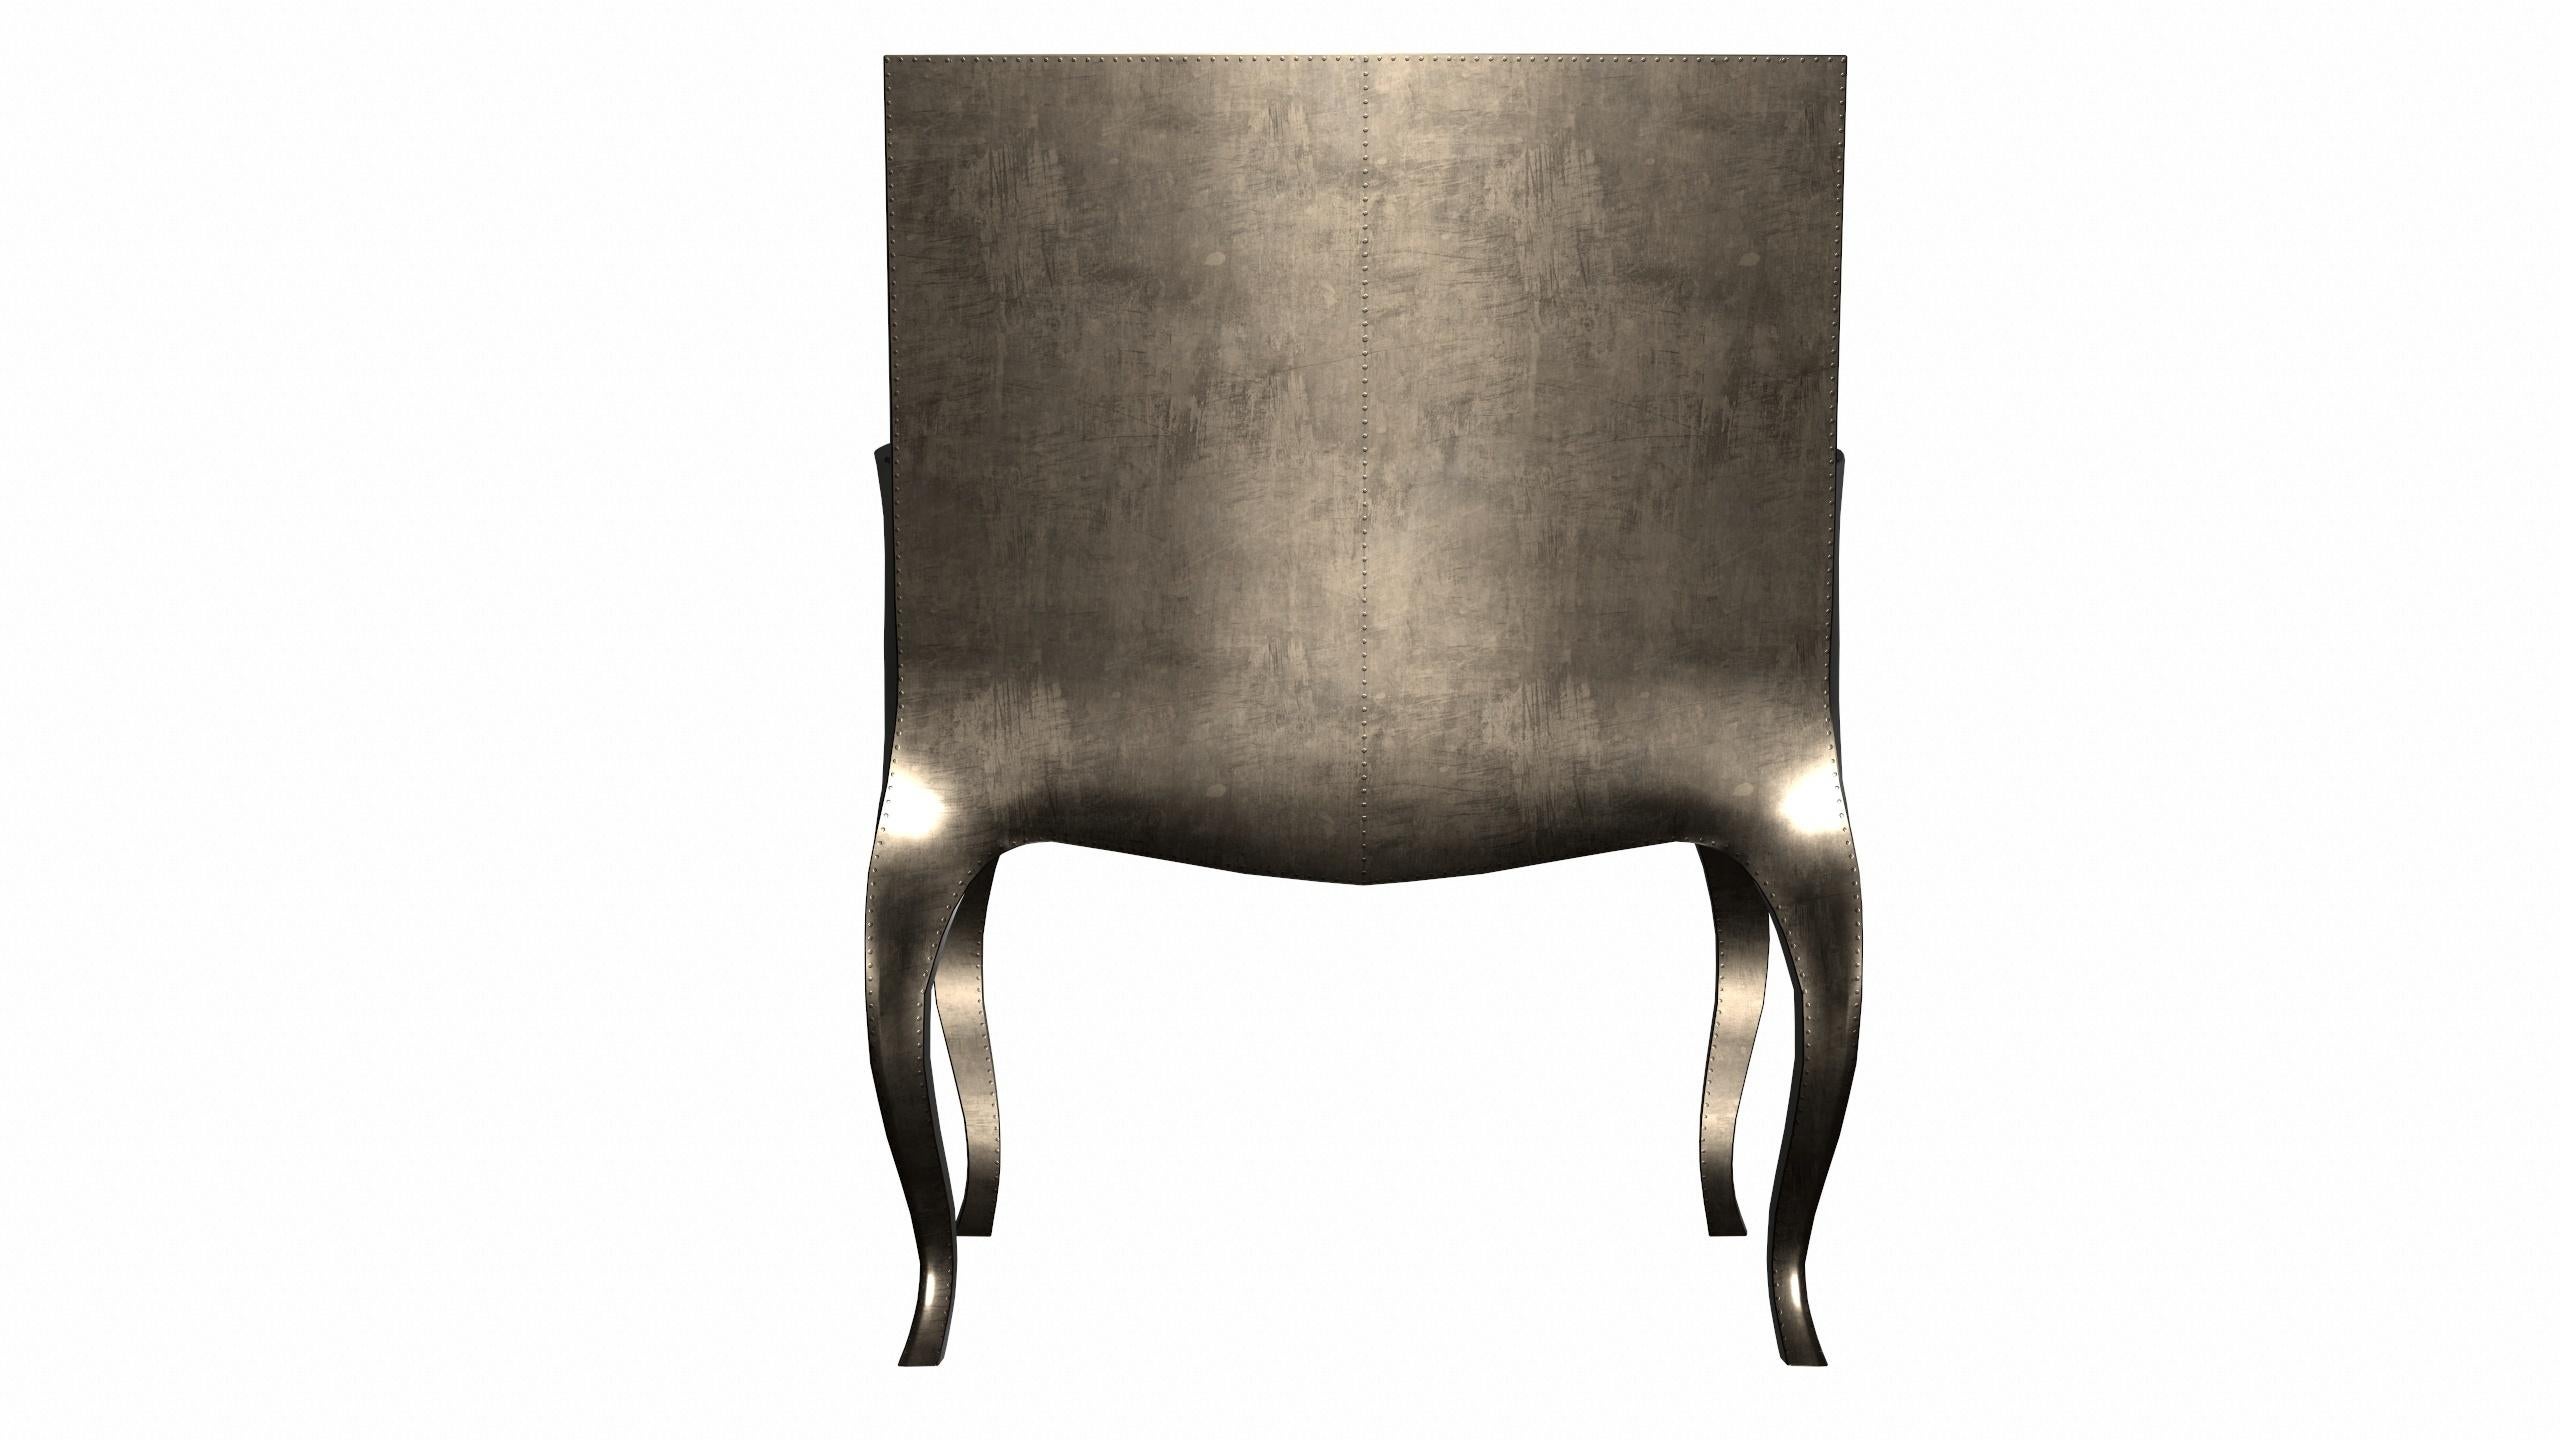 Hammered Art Deco Club Chairs Smooth Antique Bronze by Paul Mathieu for S. Odegard For Sale